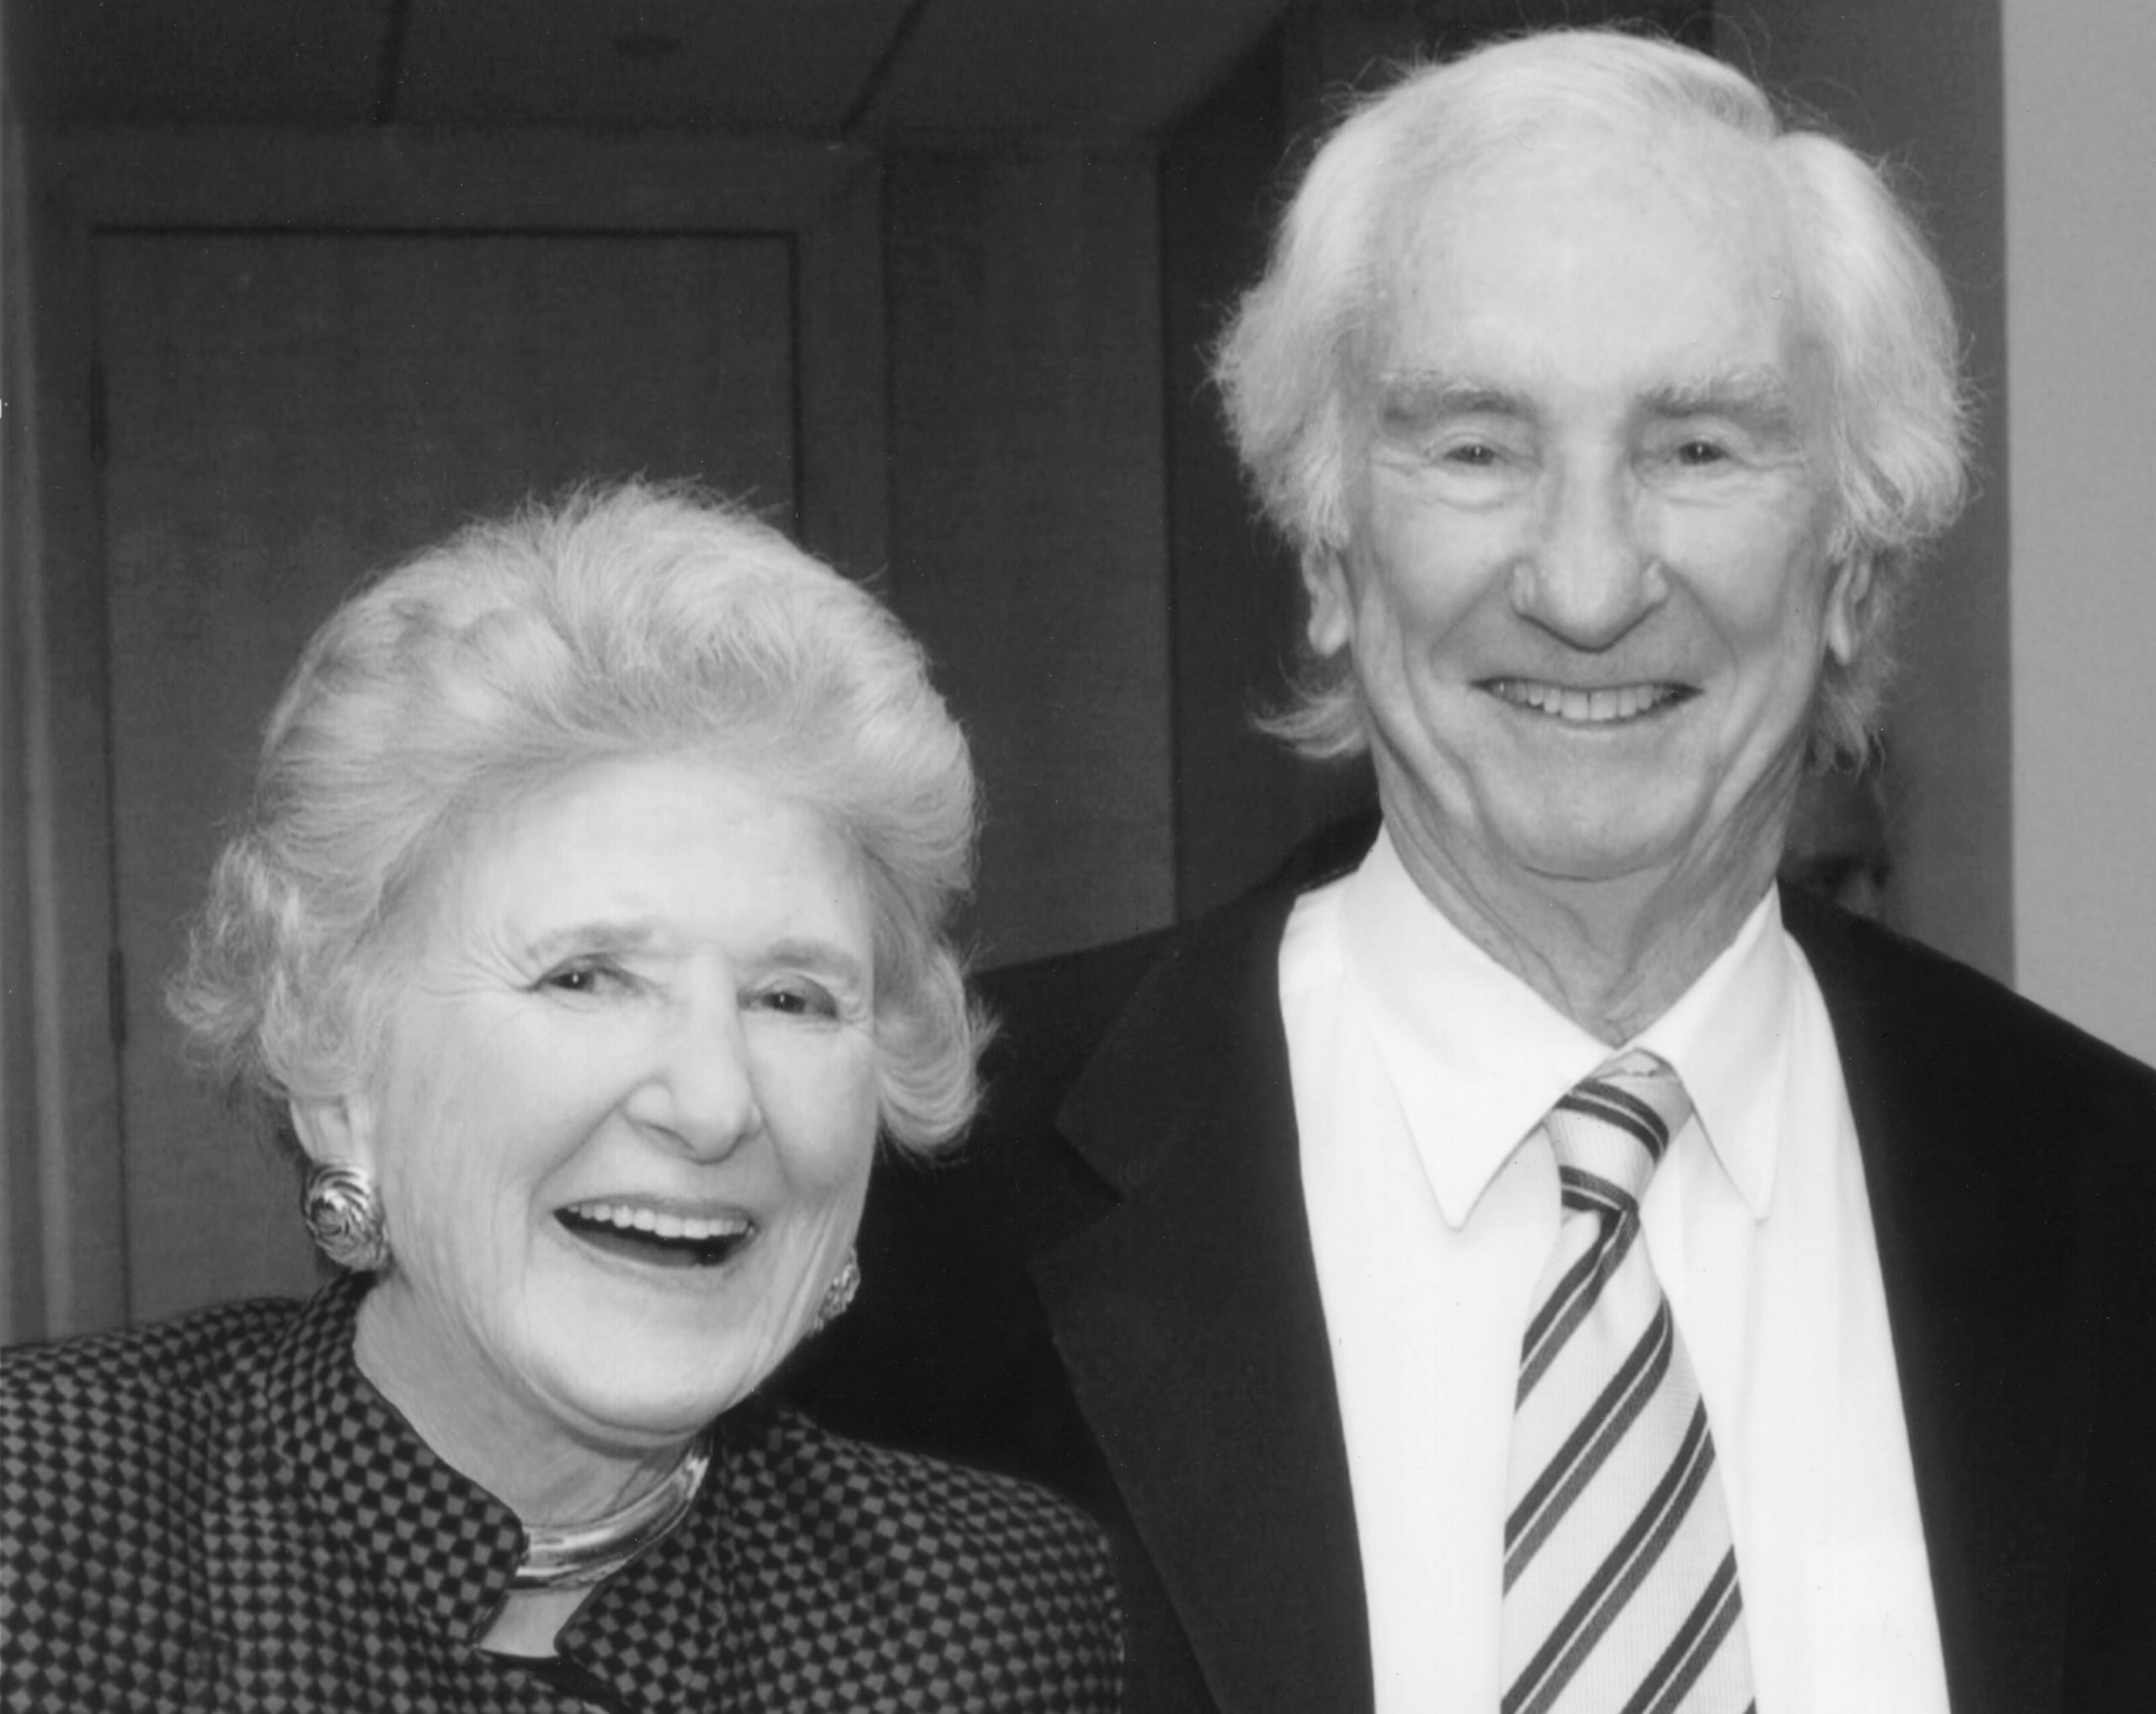 Peter O'Donnell Jr and his wife Edith pictured smiling. Southwestern Medical Foundation honoring Peter O'Donnell Jr. for his philanthropic work.